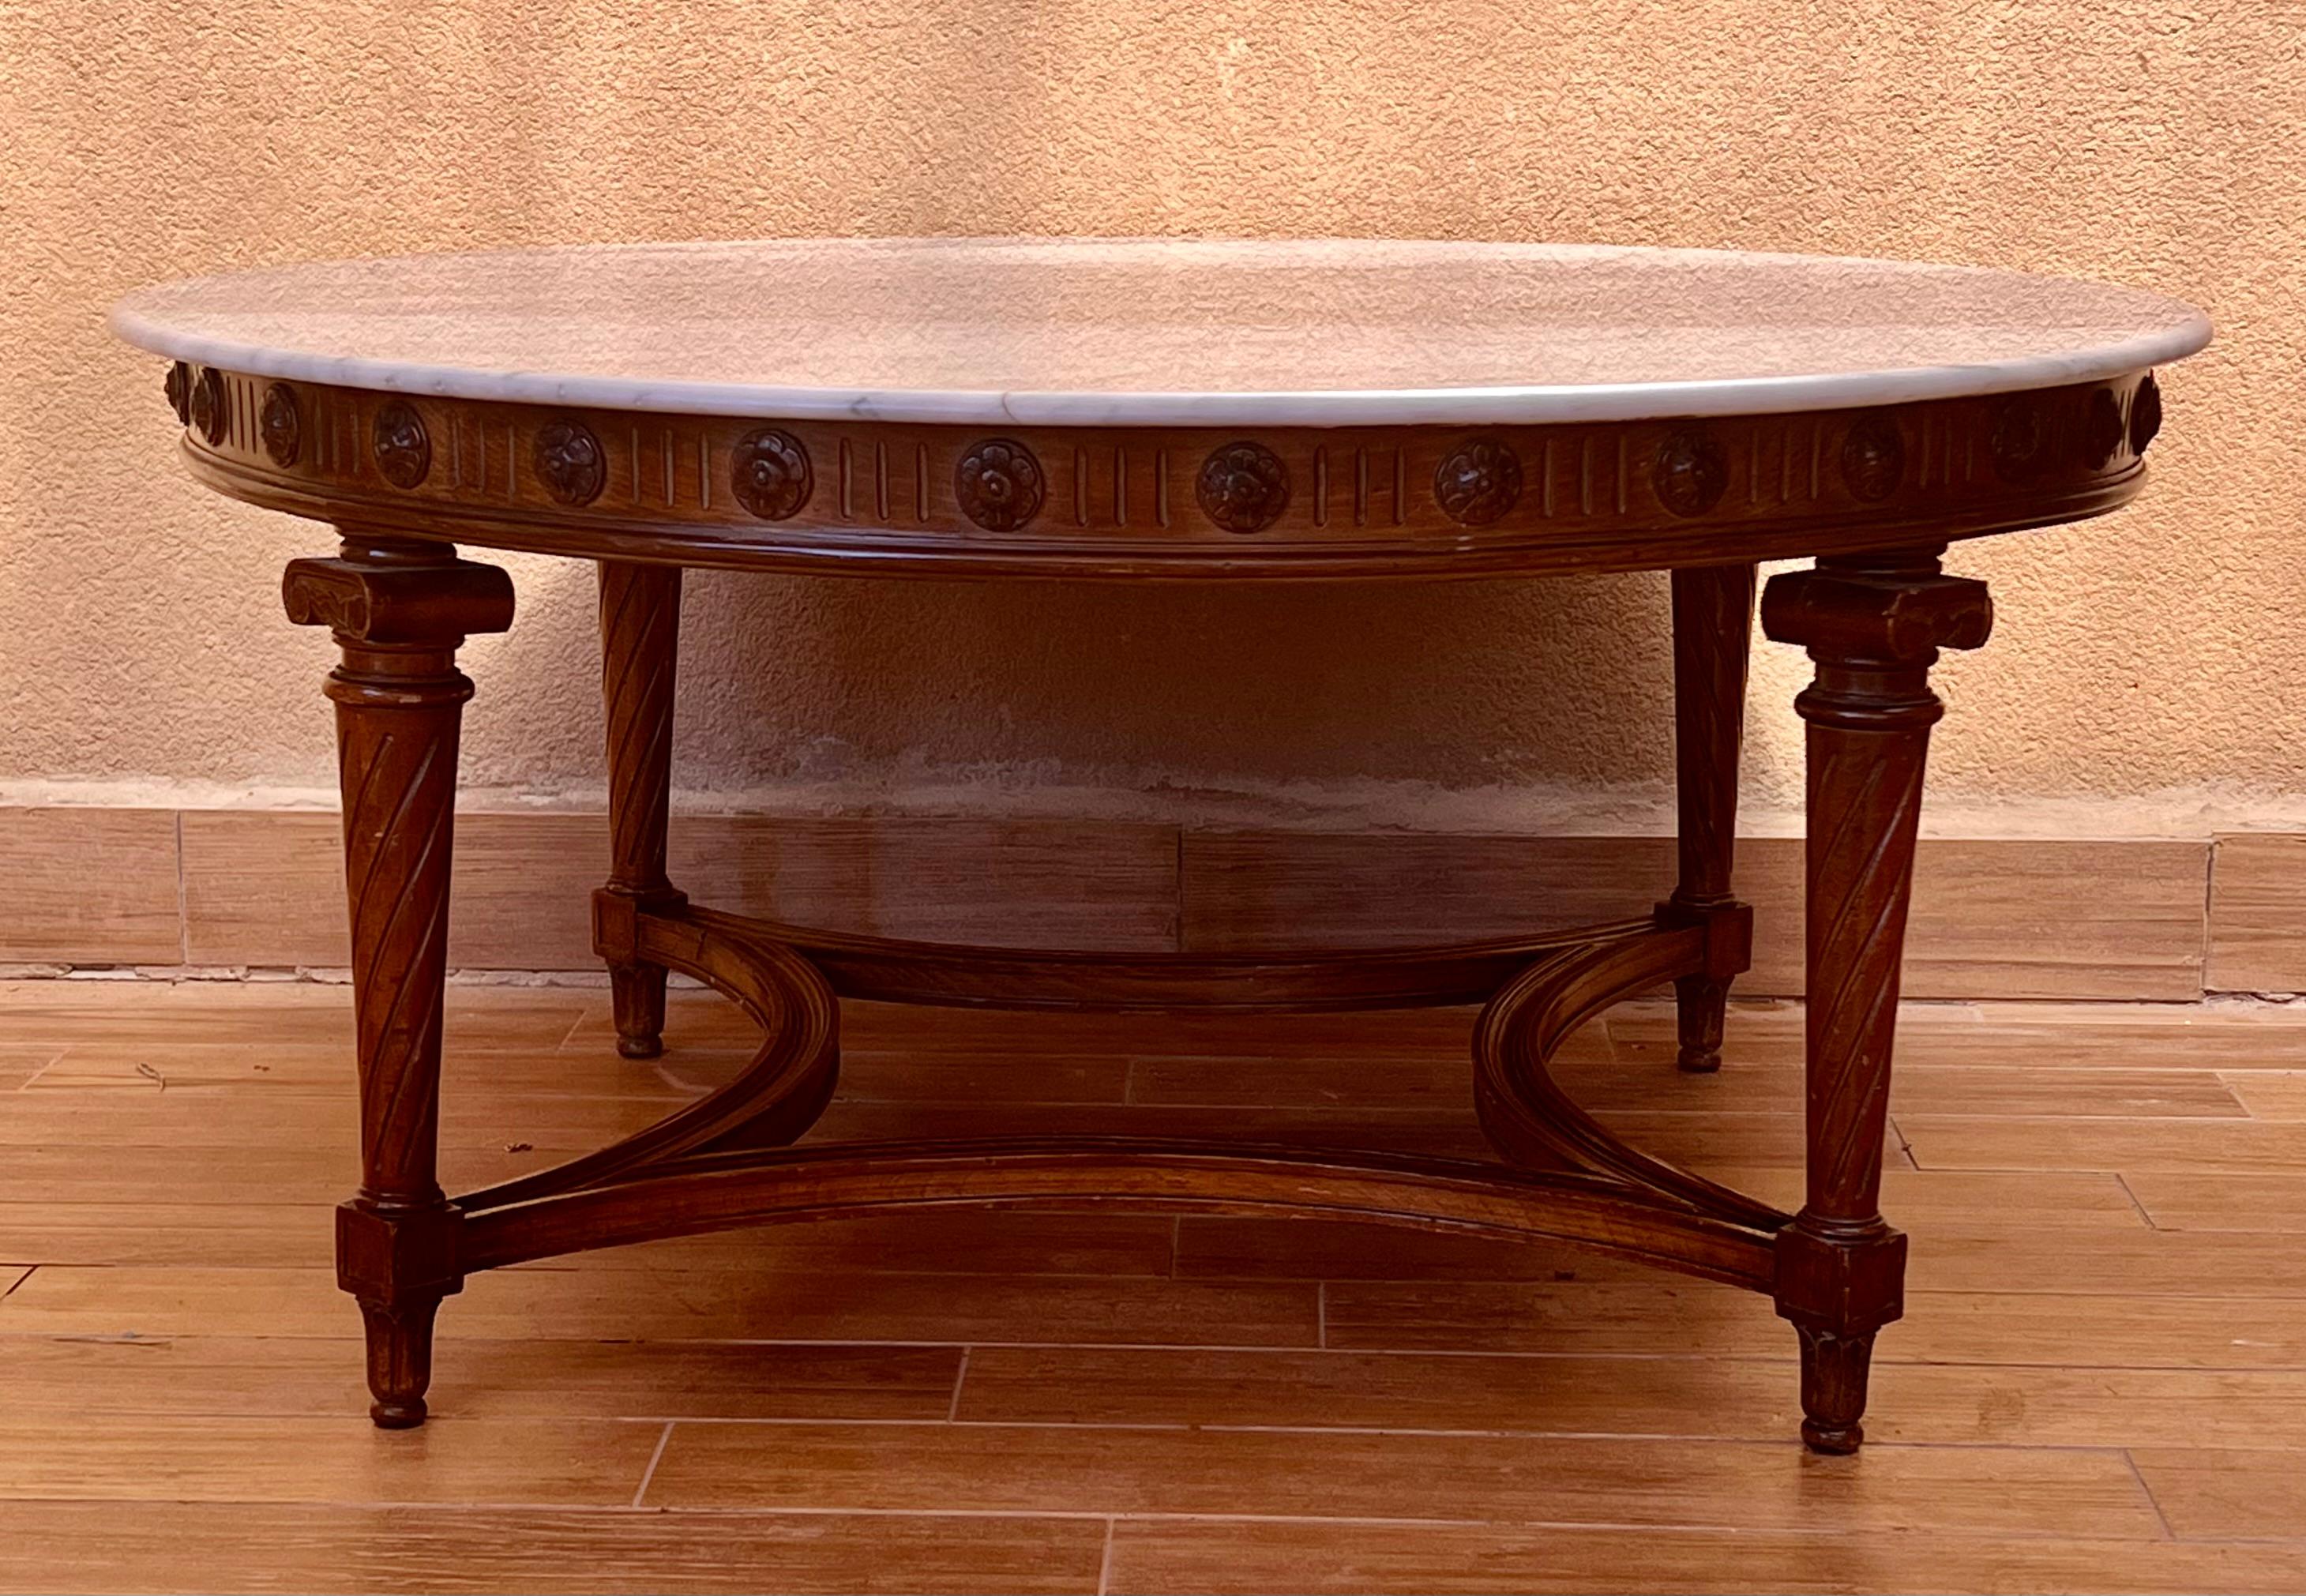 20th round coffee table with marble top, carved legs & wood stretcher.